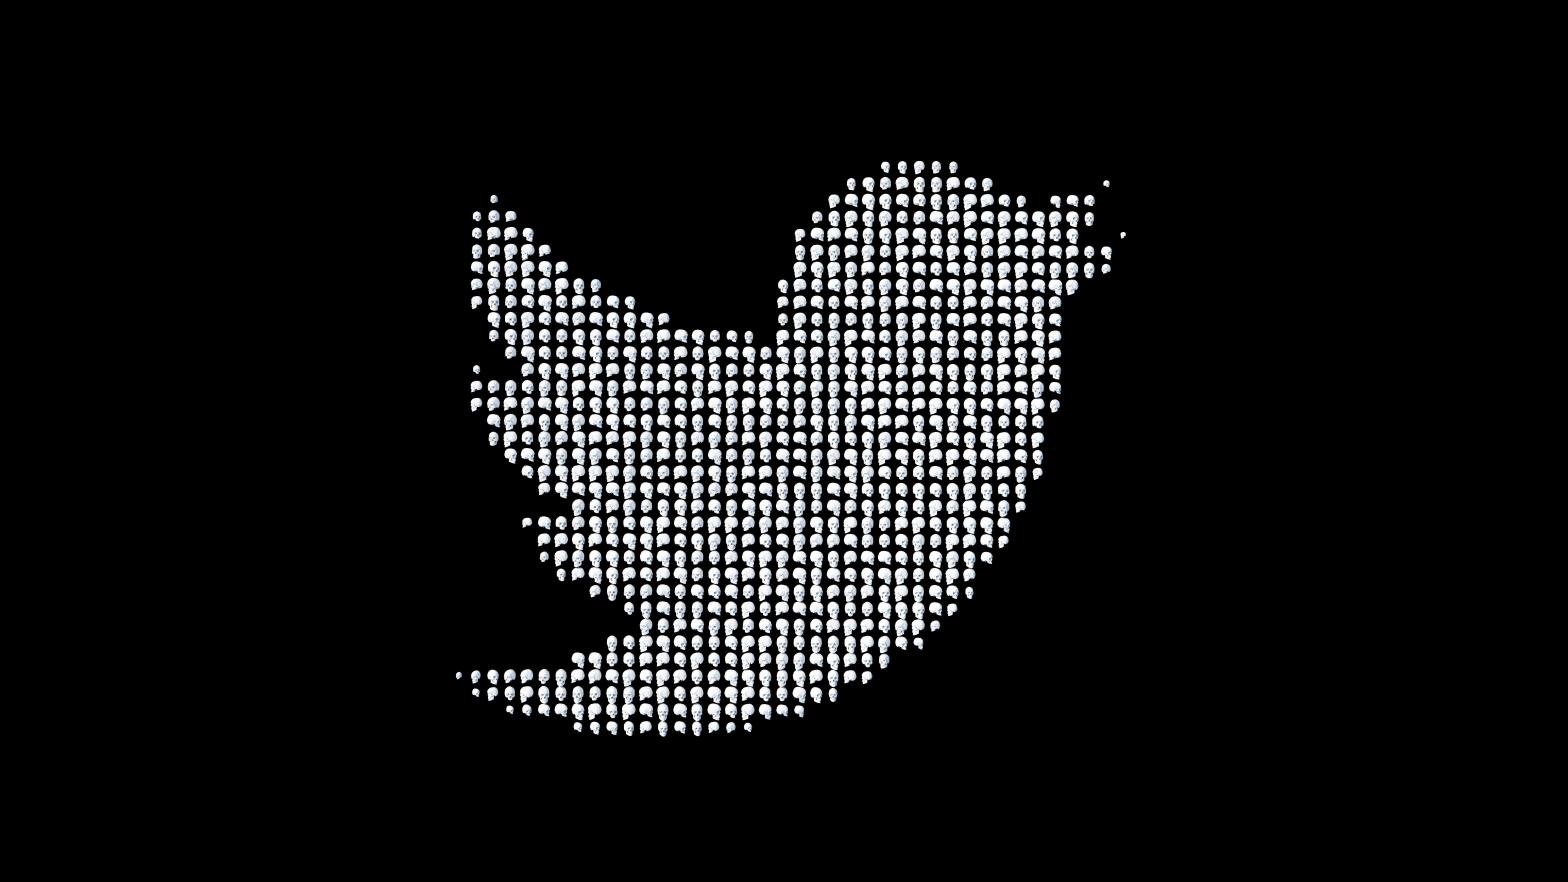 Twitter has experienced numerous widespread glitches in recent months as the company makes sweeping changes with far fewer employees. (Image: 80's Child, Shutterstock)